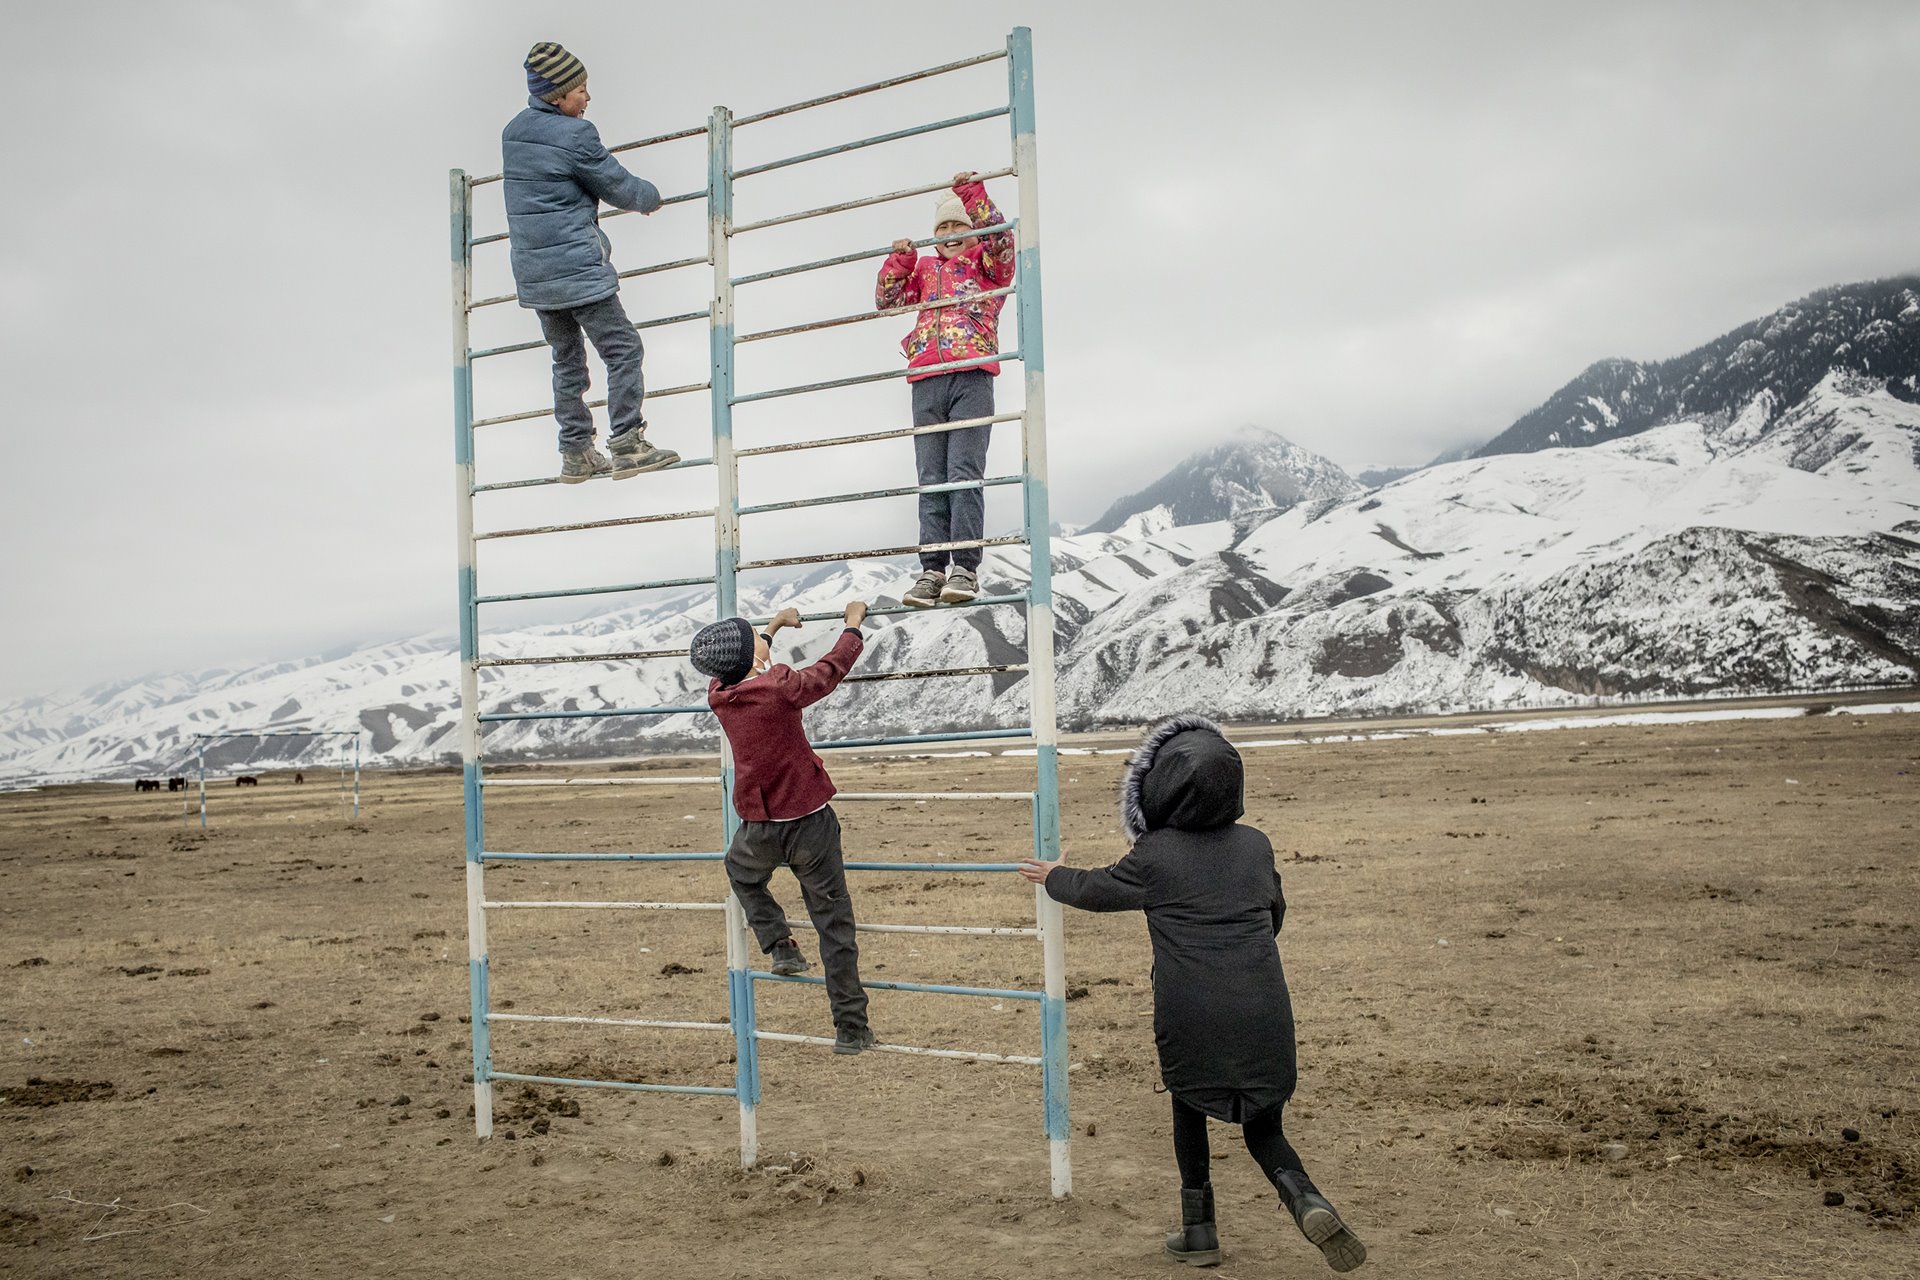 <p>Children climb in an outdoor playground near the Naryn River, in Ak-Kyya, Kyrgyzstan. The Naryn, which feeds into the Syr Darya River, supplies hydroelectric power to the region.</p>
